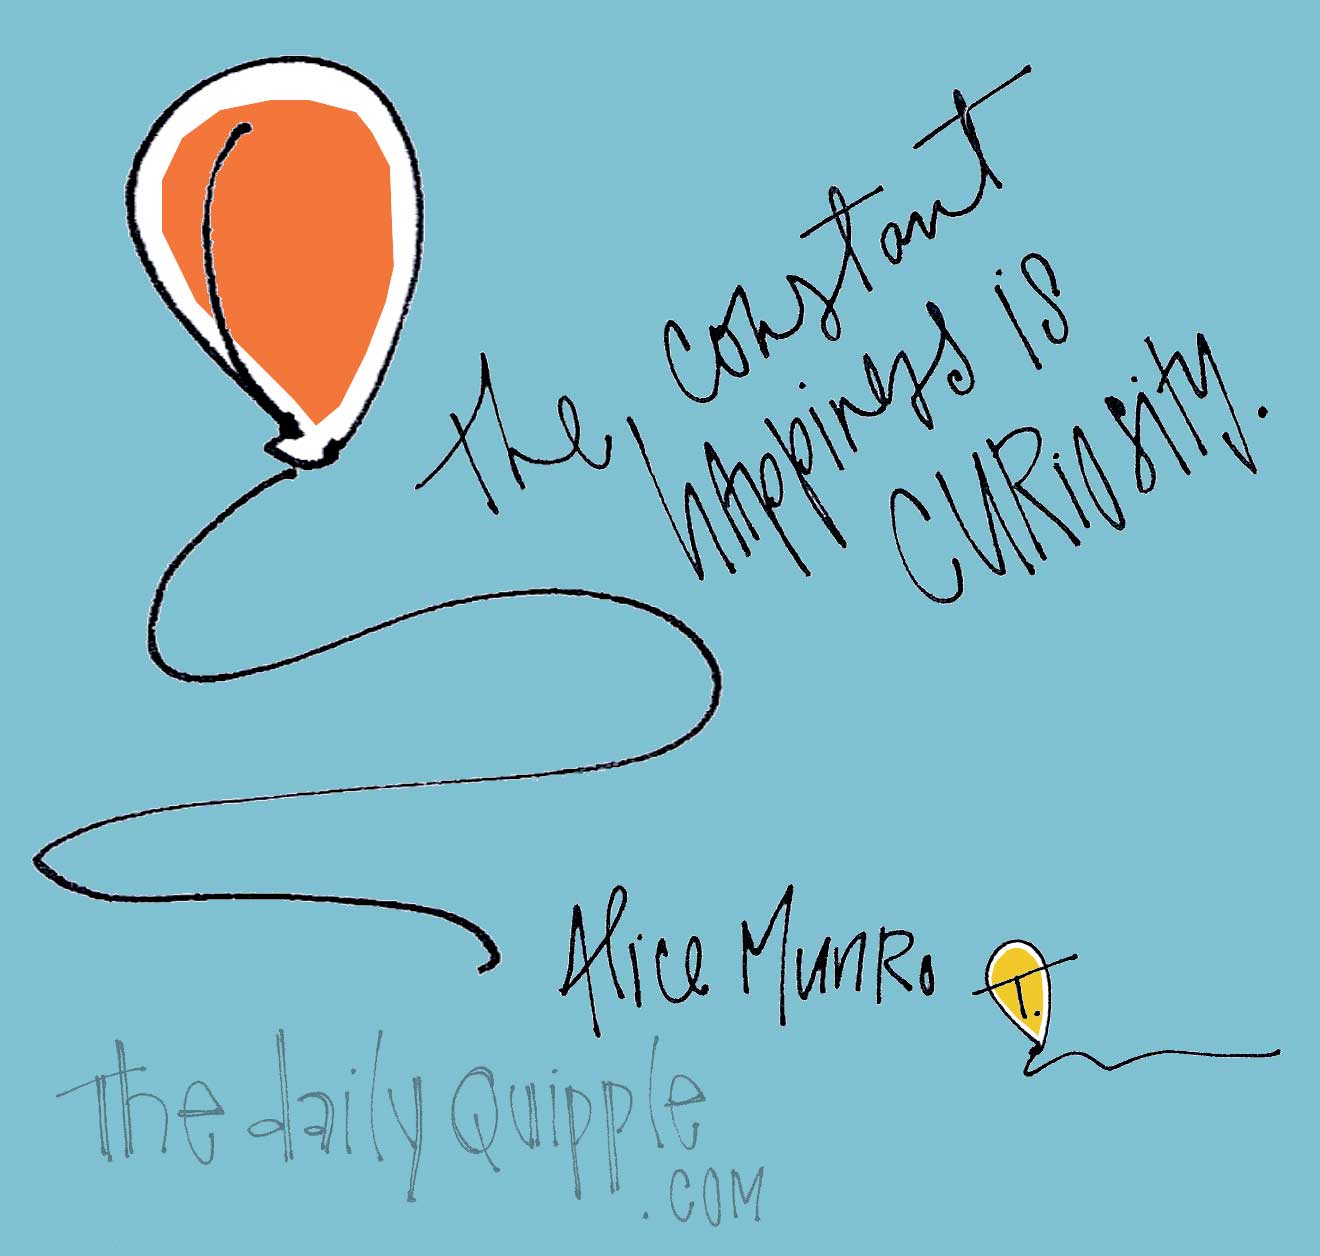 The constant happiness is curiosity - Alice Munro